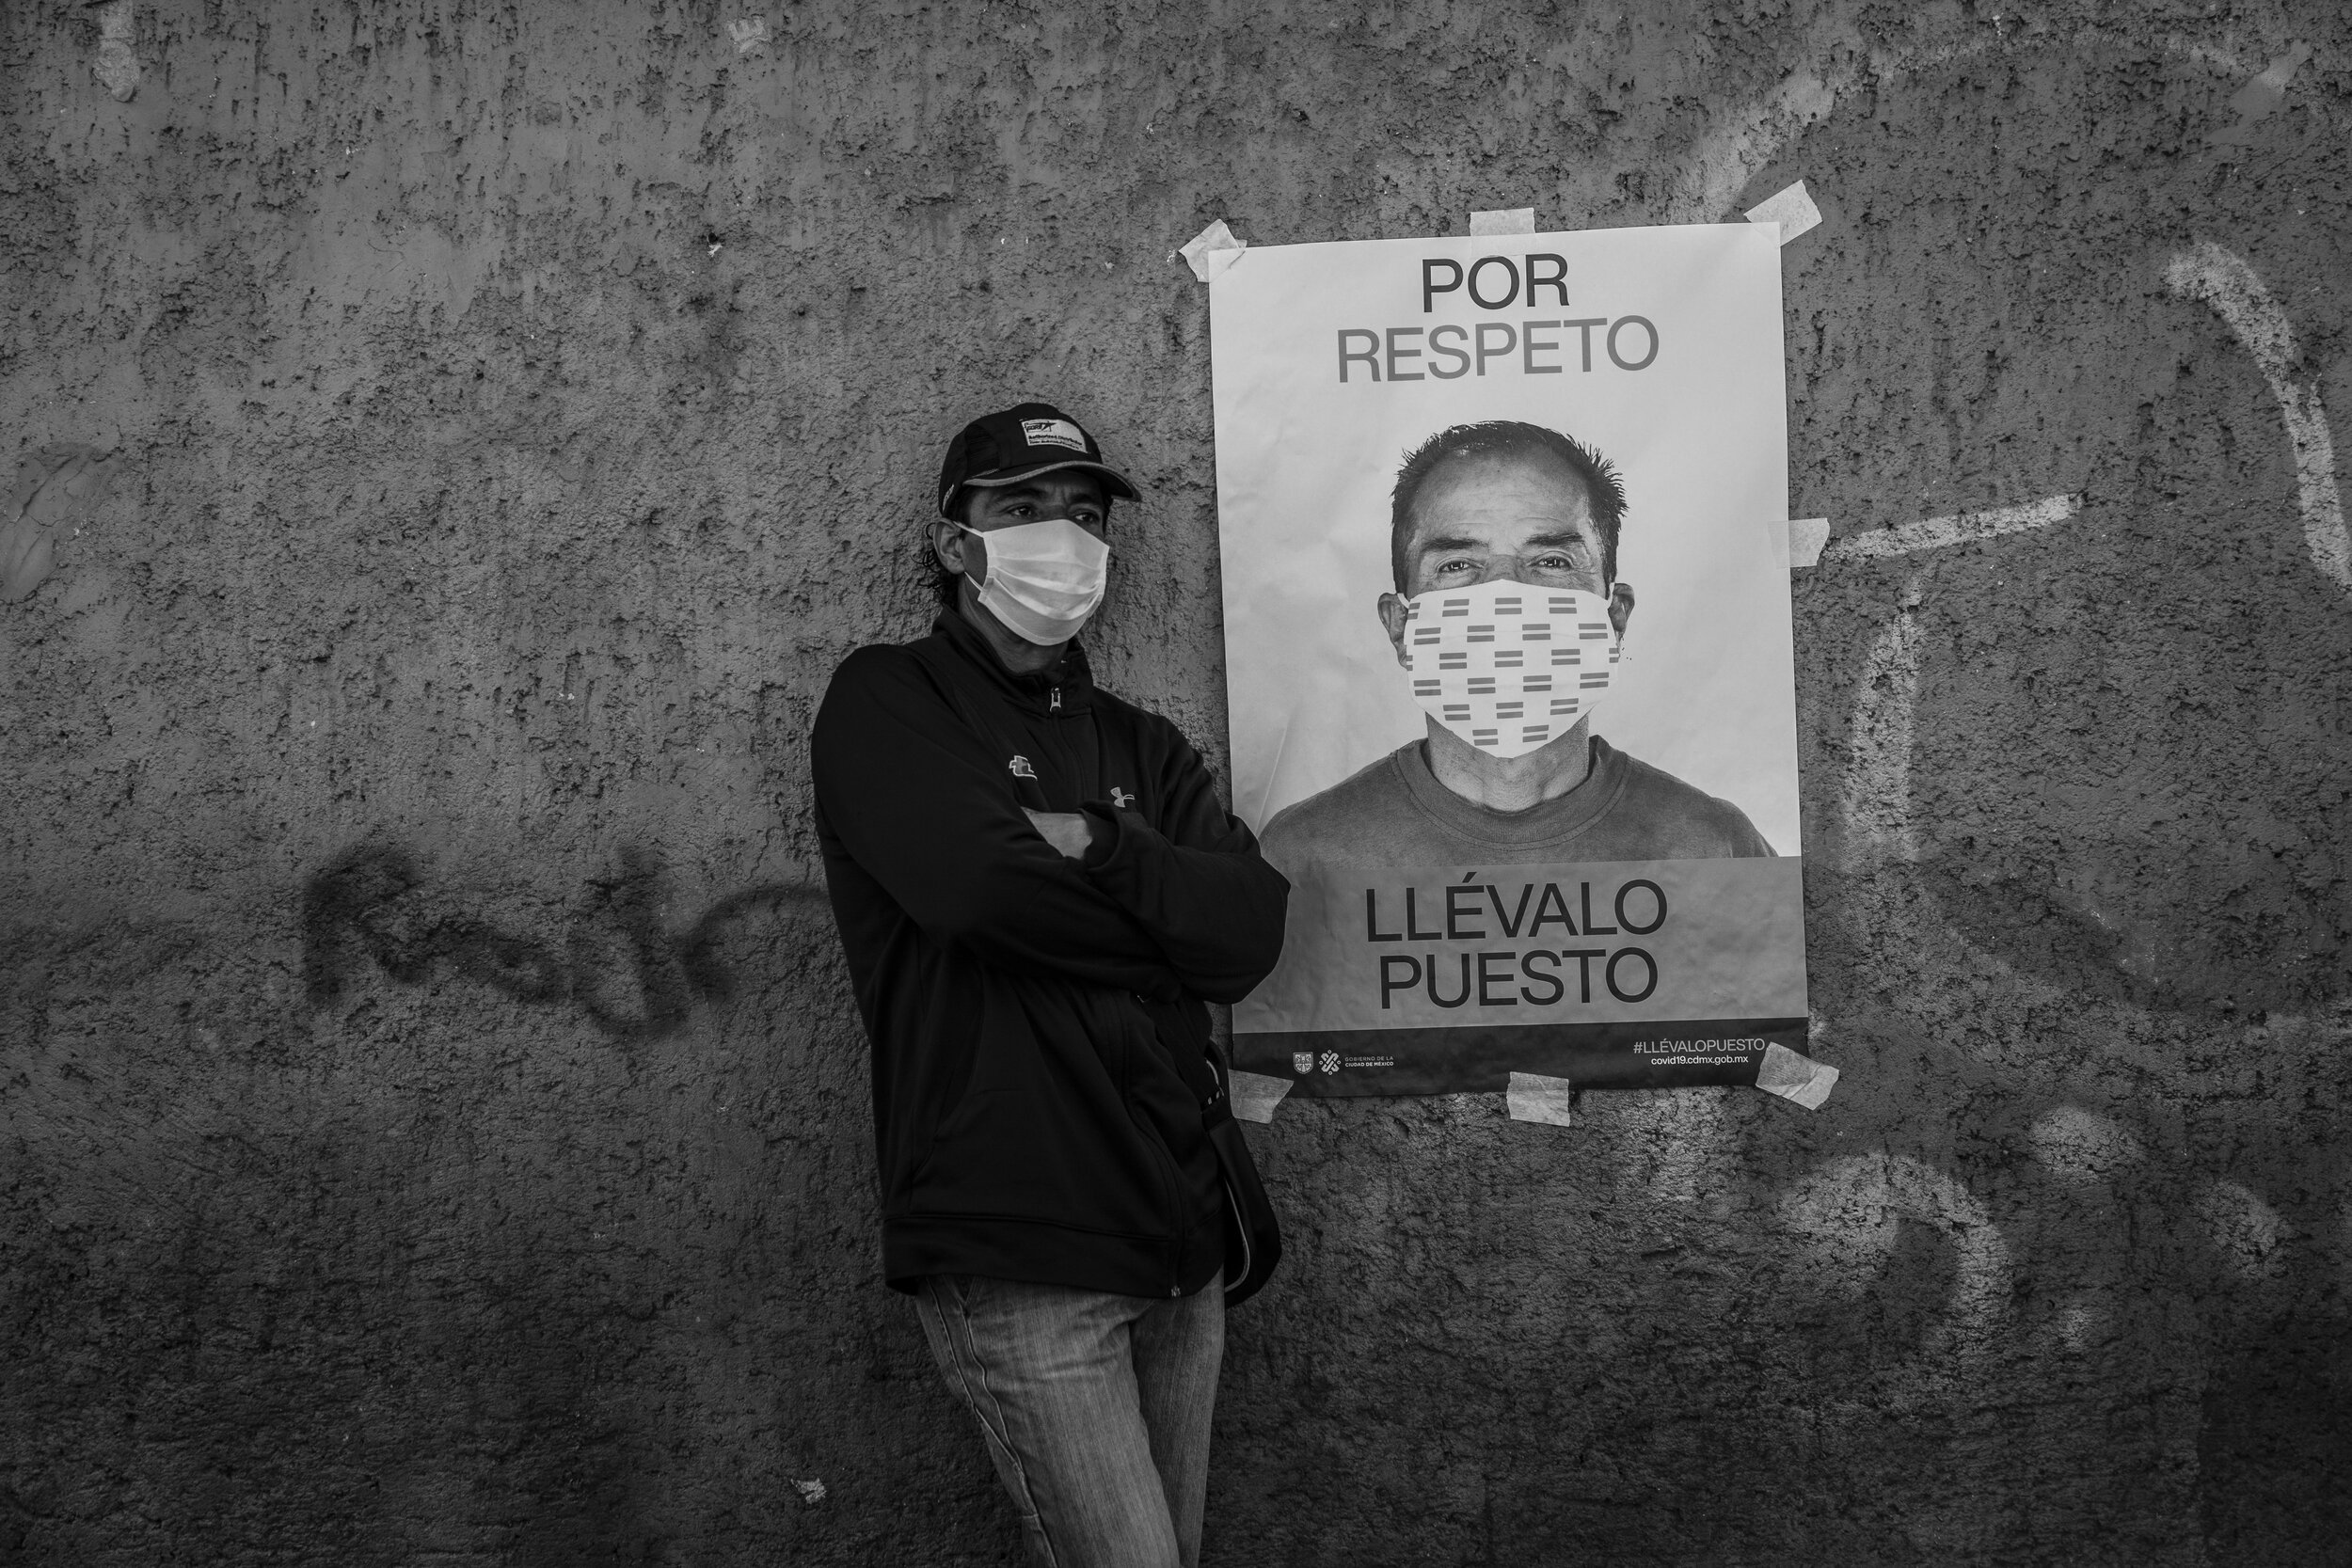   A man wearing a face mask waits in line at a makeshift mobile health station where COVID-19 tests are carried out, Mexico City.   